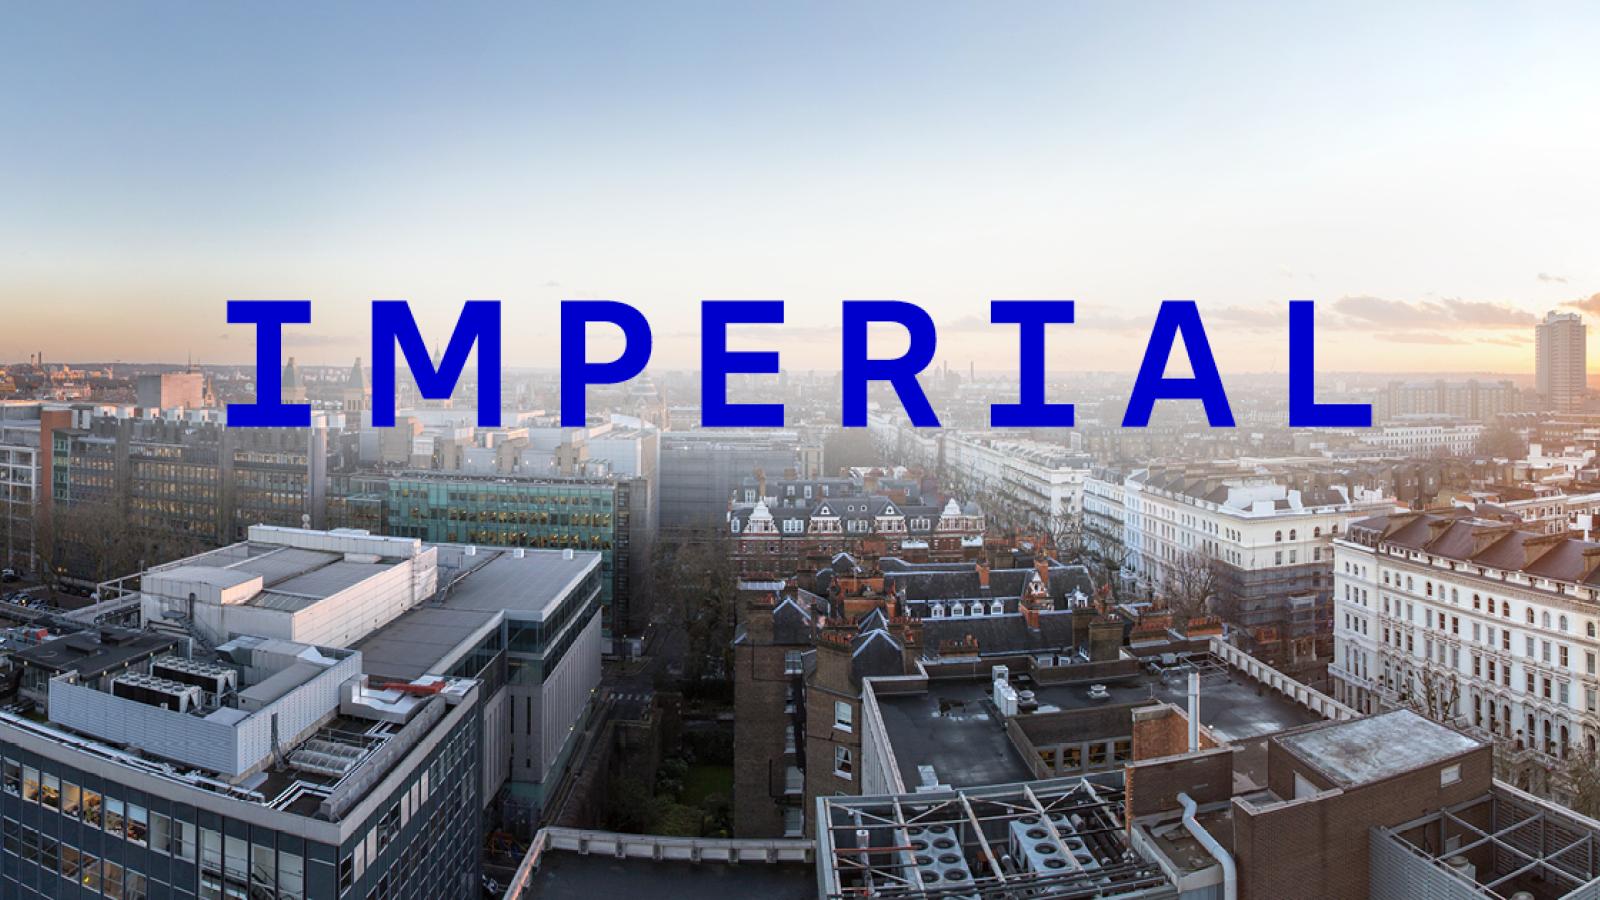 A cityscape with Imperial written on it